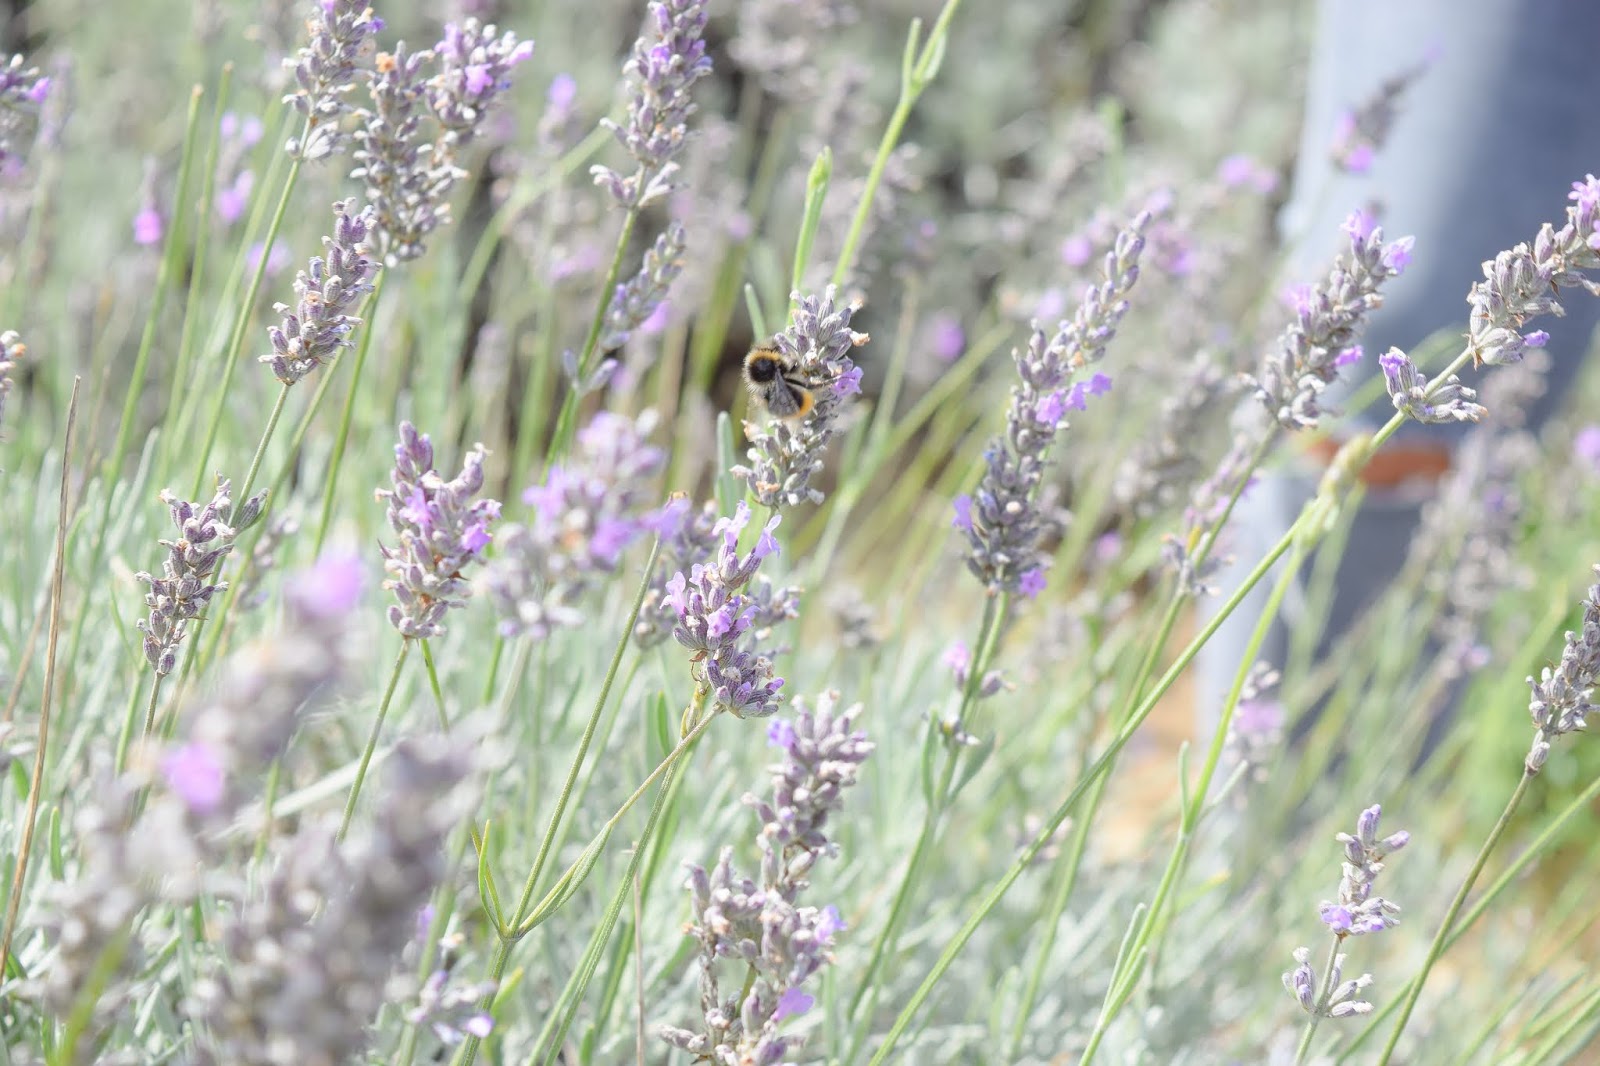 A close up photograph of a yellow and black bumblebee on a lavender head.